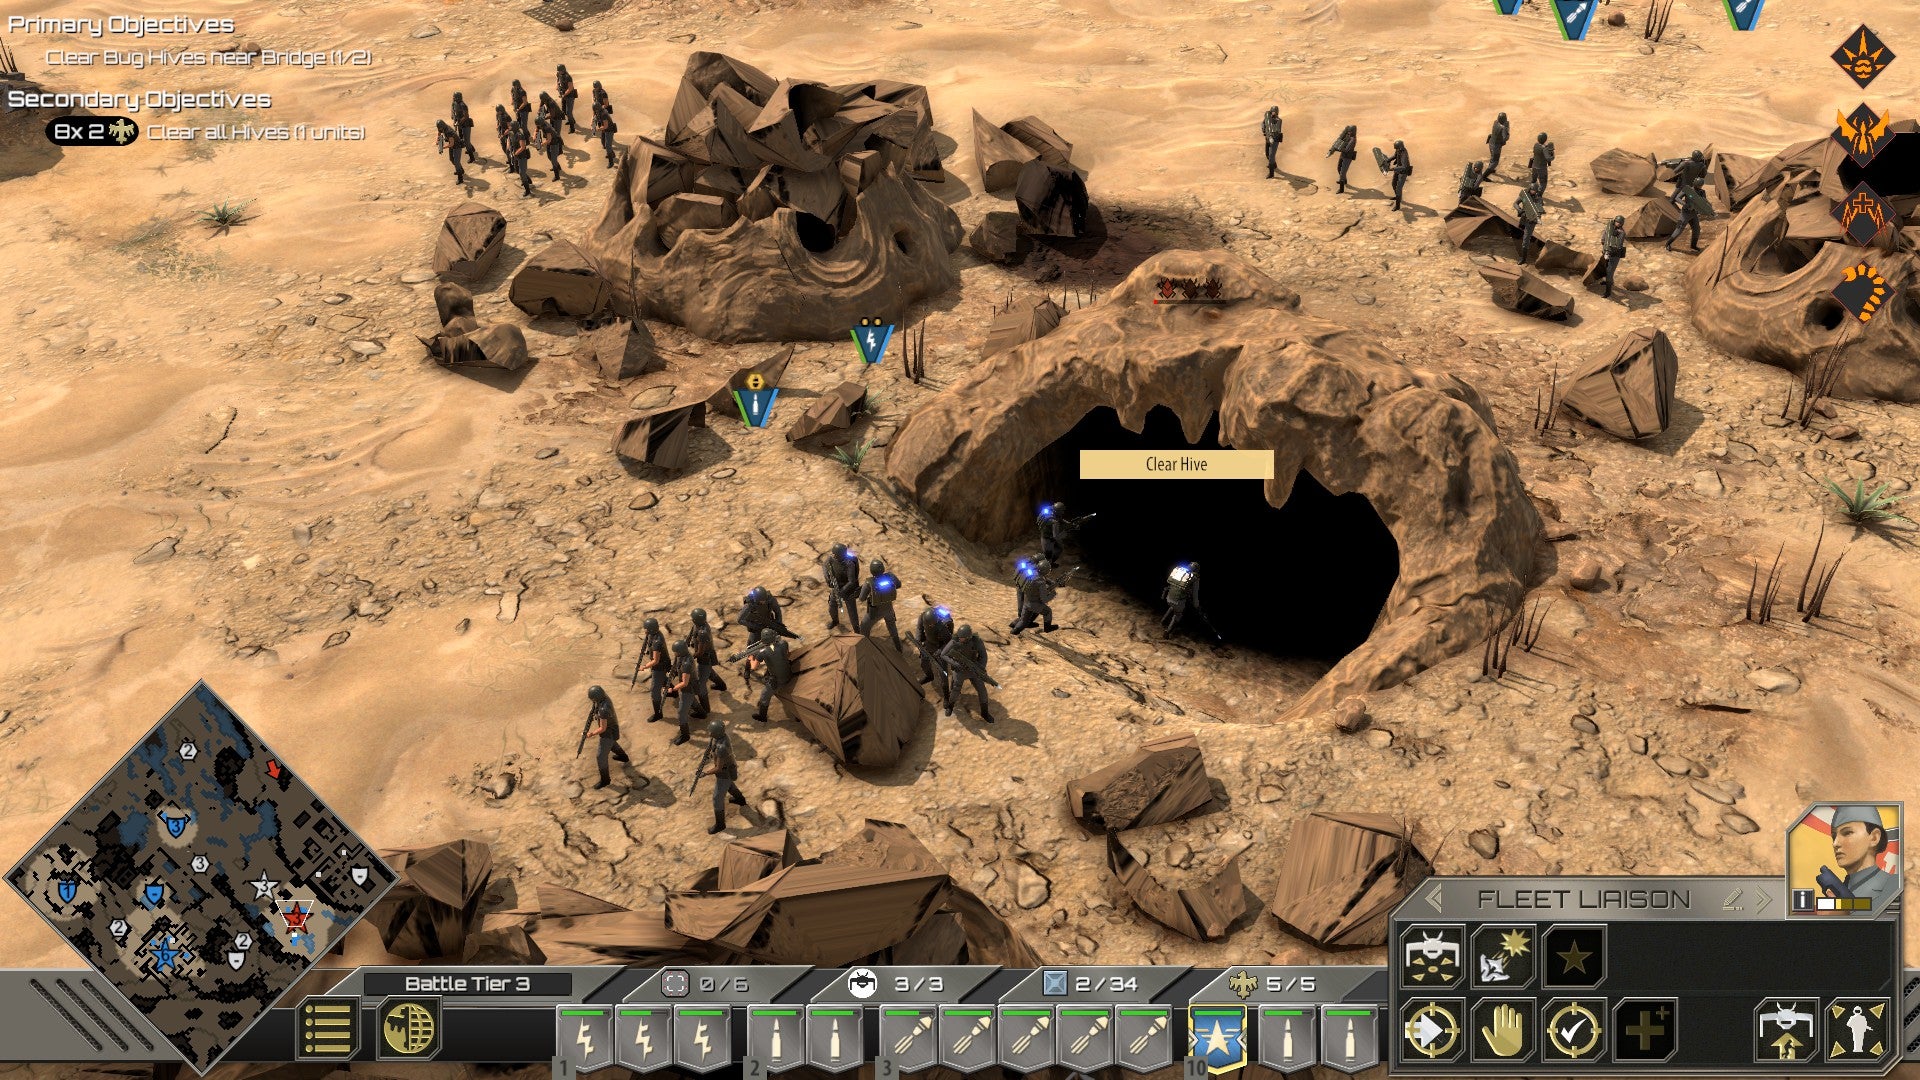 A squad of Marines about to clear an underground hive in Starship Troopers: Terran Command